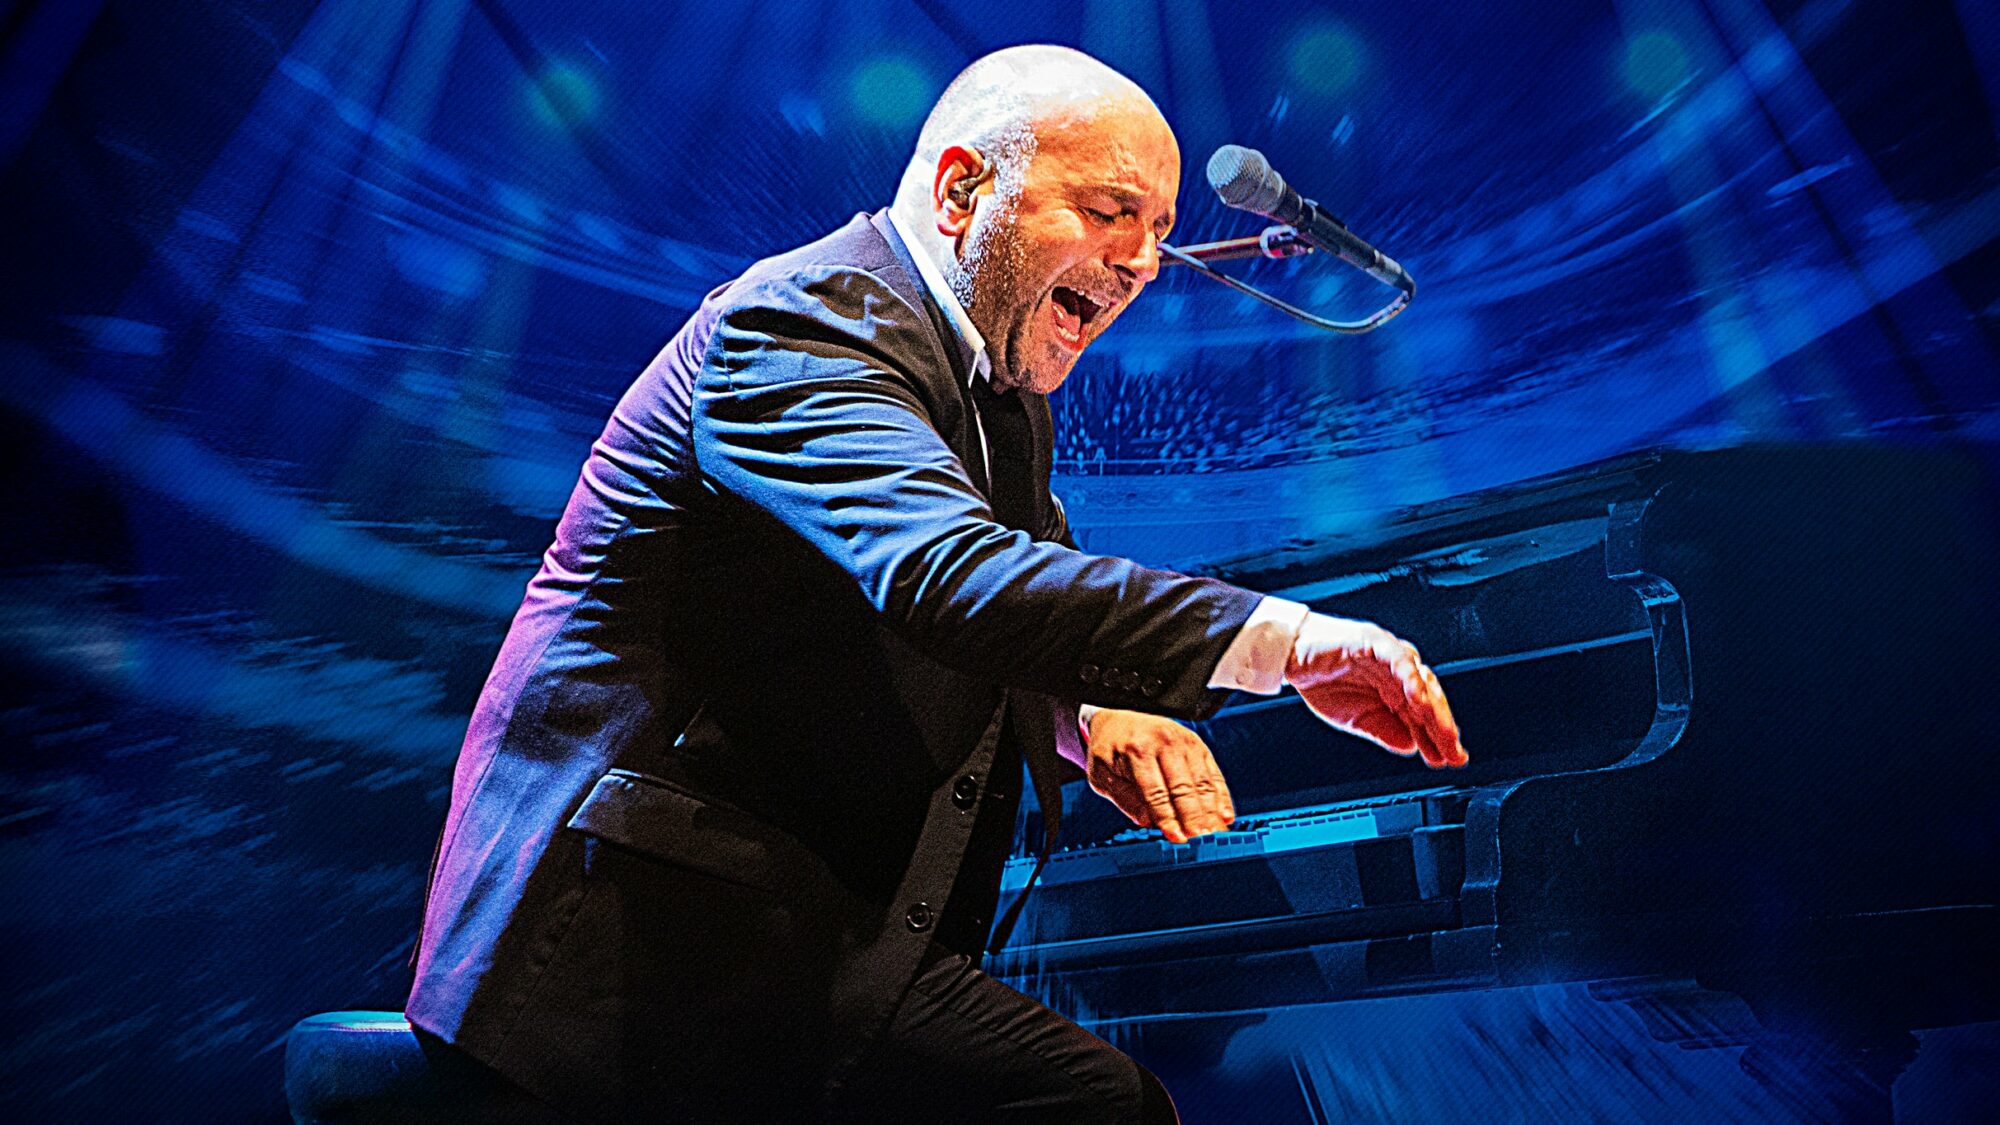 Image name The Billy Joel Songbook at Hull City Hall Hull the 25 image from the post The Billy Joel Songbook at Sheffield City Hall Oval Hall, Sheffield in Yorkshire.com.